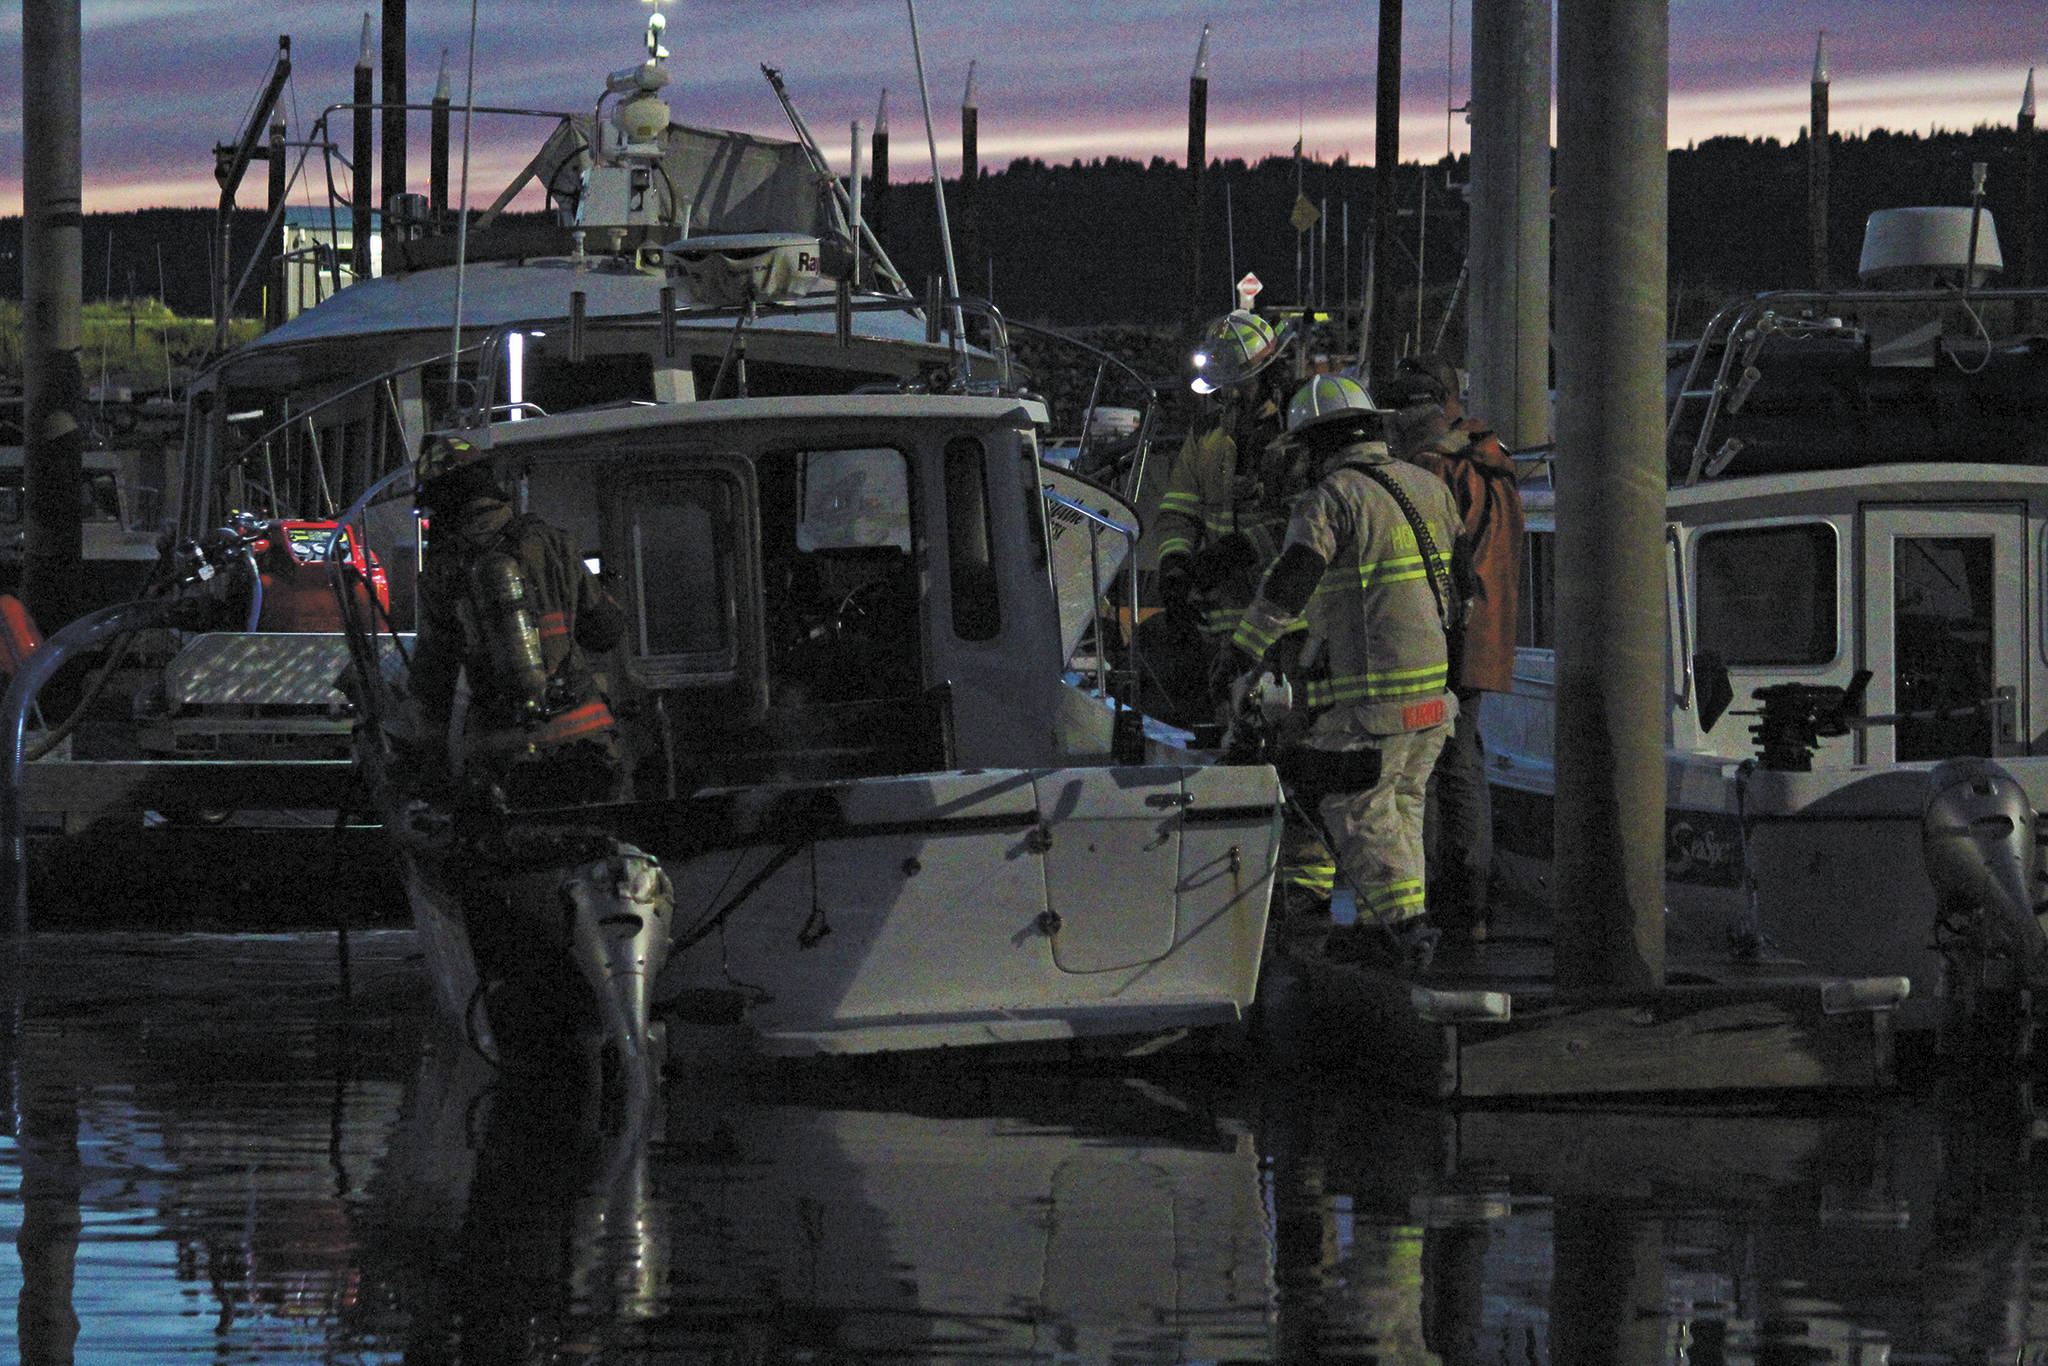 Firefighters finish putting out a fire on a 32-foot fiberglass boat on Friday, Sept. 11, 2020 at the Homer Harbor in Homer, Alaska. No one was onboard at the time and no one was injured. (Photo by Megan Pacer/Homer News)